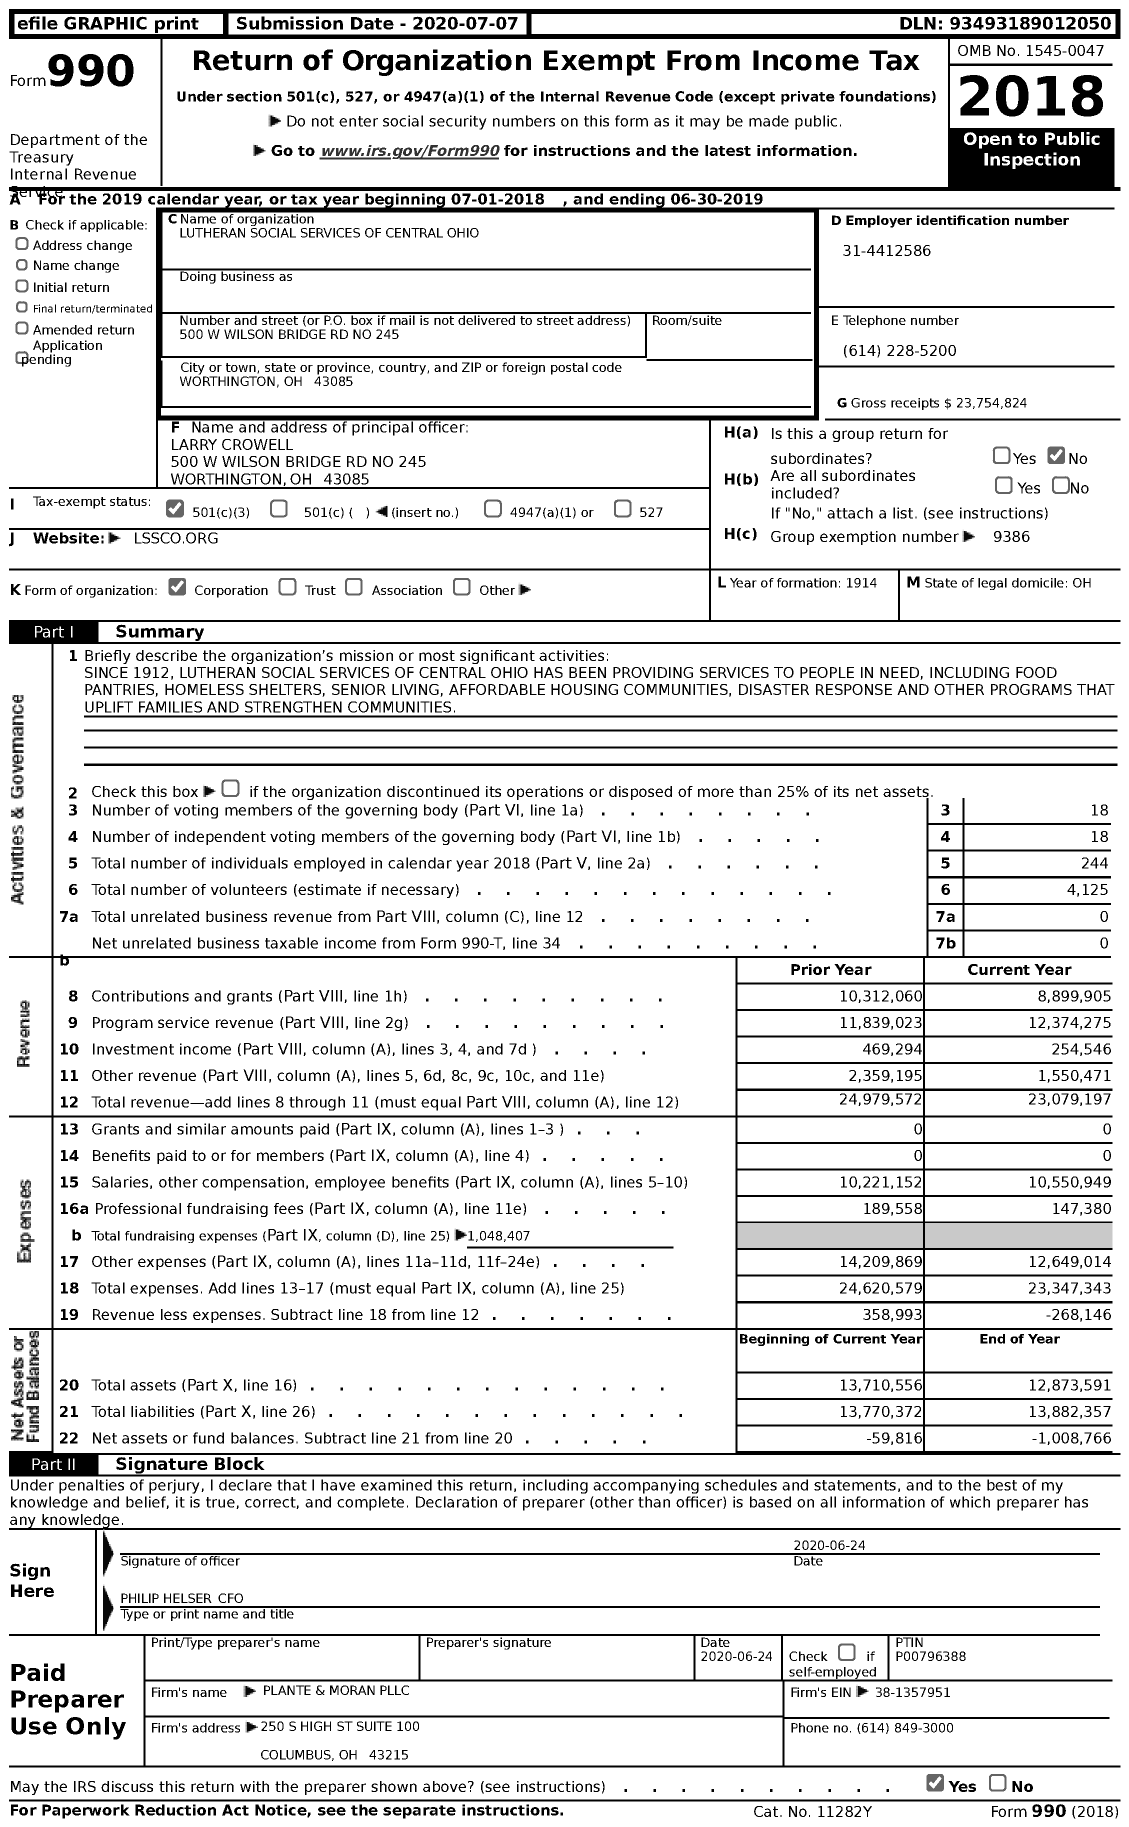 Image of first page of 2018 Form 990 for Lutheran Social Services of Central Ohio (LSS)